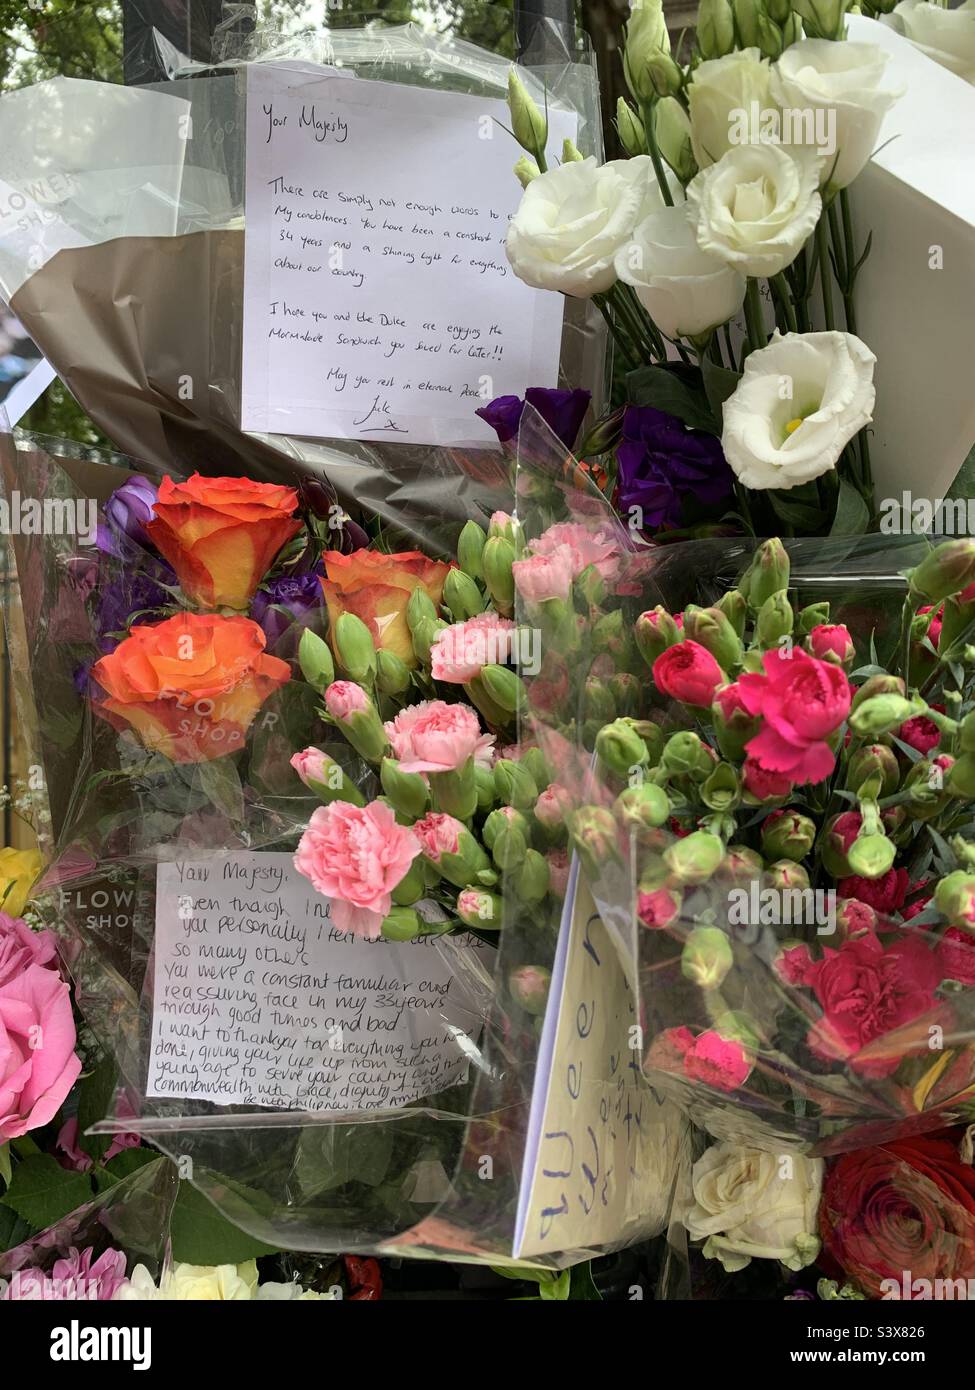 Floral tributes and letters at Buckingham palace to pay respects for Queen Elizabeth II death. 11th September 2022, London. Stock Photo